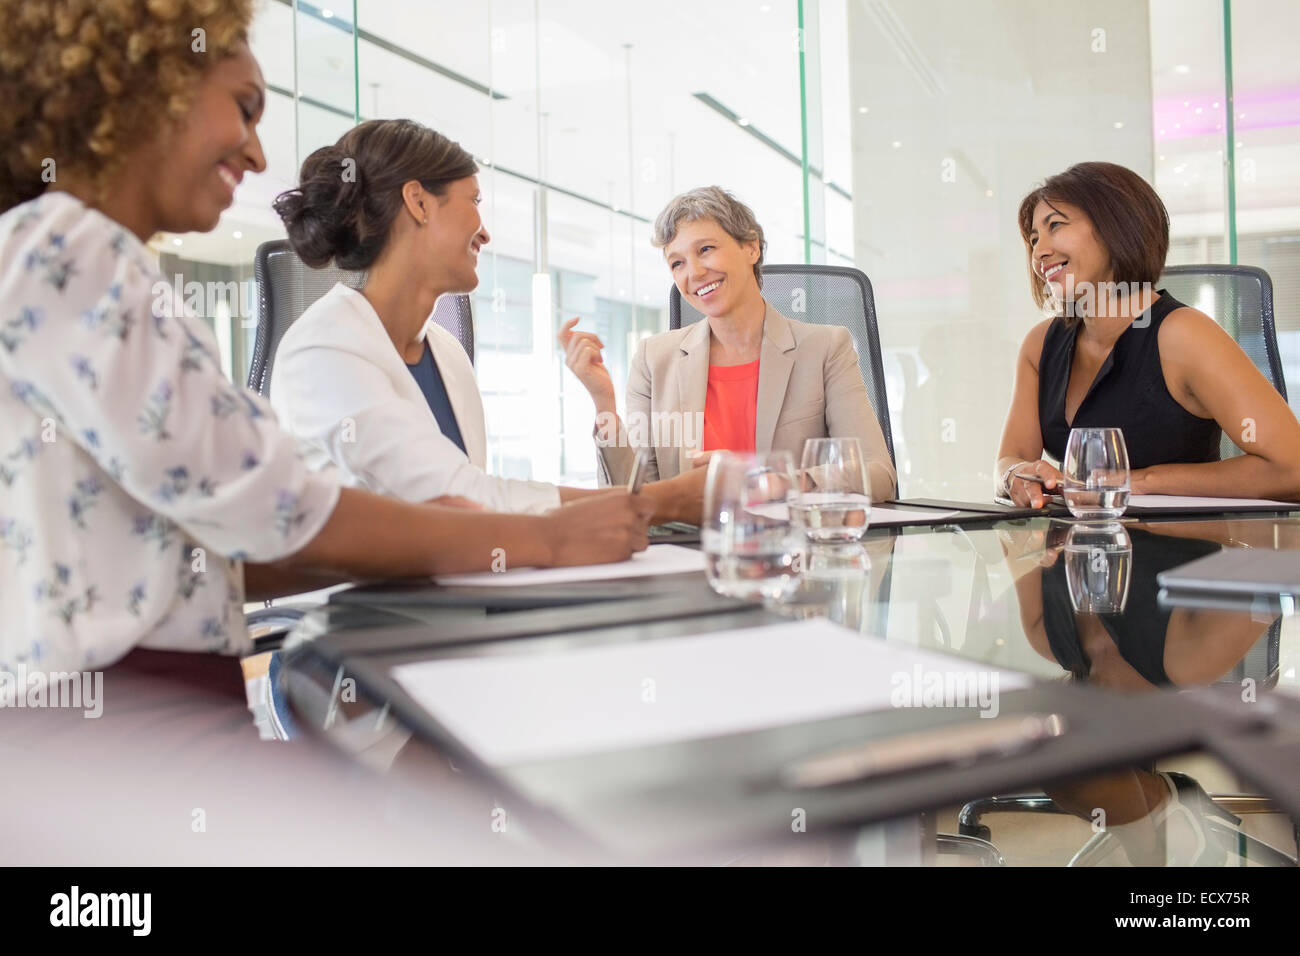 Businesswomen sitting at conference table talking Stock Photo